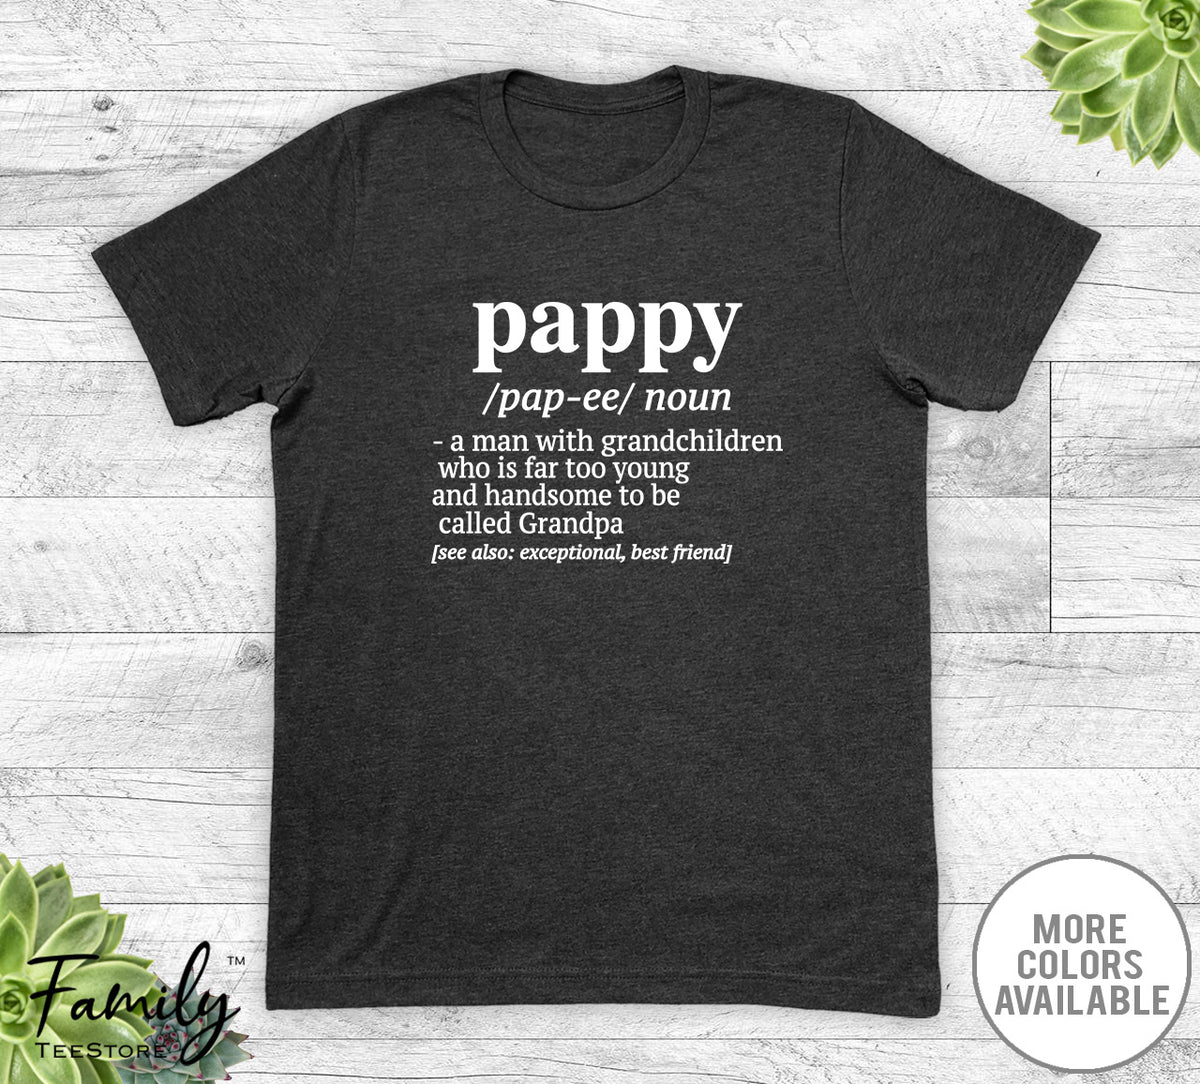 Pappy A Man With Grandchildren... - Unisex T-shirt - Pappy Shirt - Pappy Gift